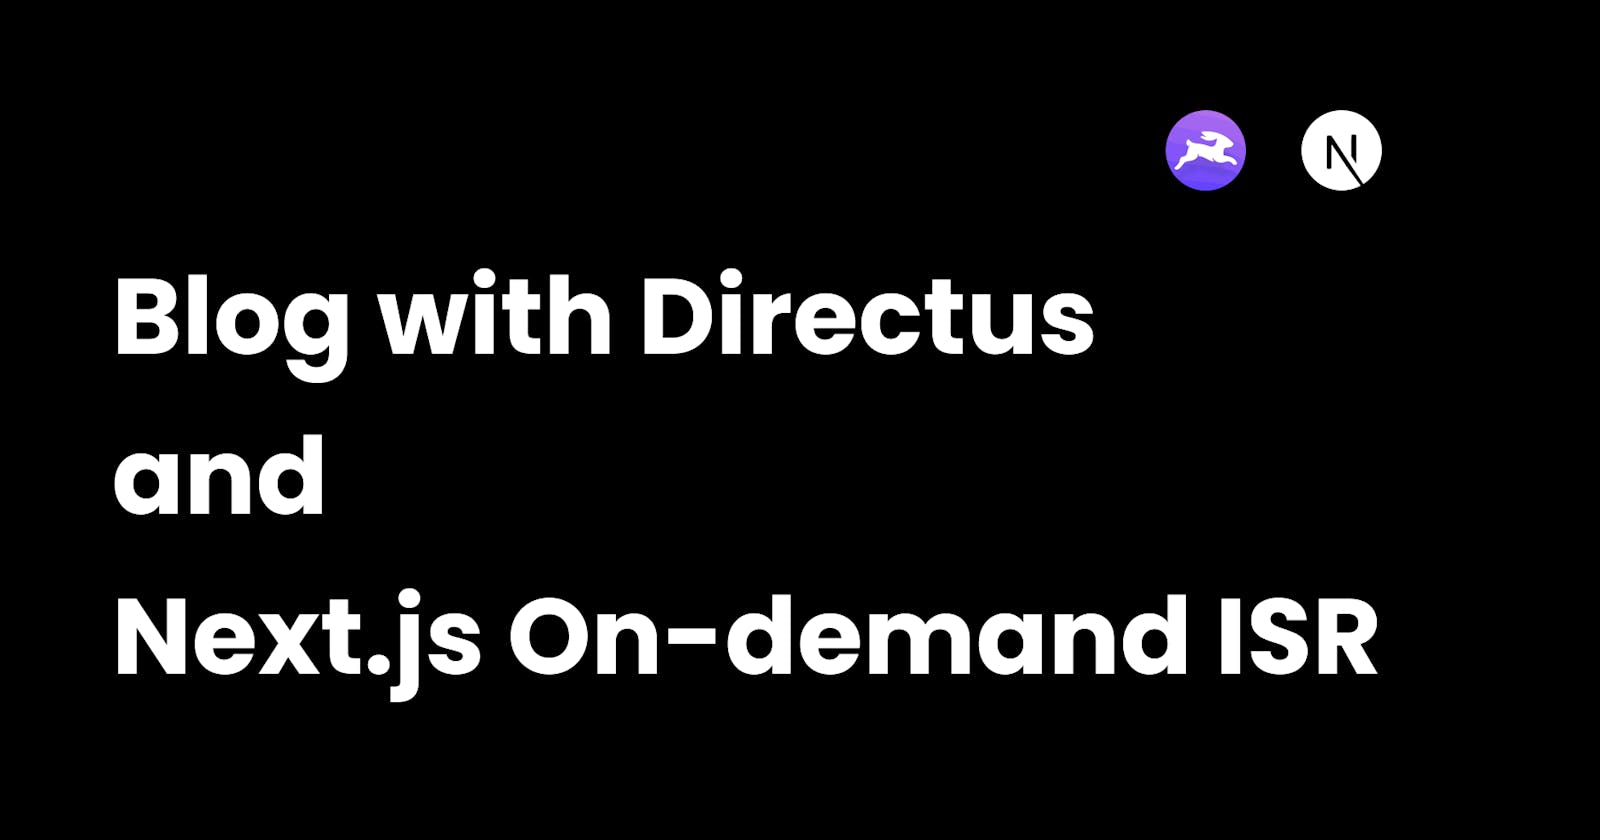 Making a blog with Directus, MDX, and Next.js On-Demand ISR